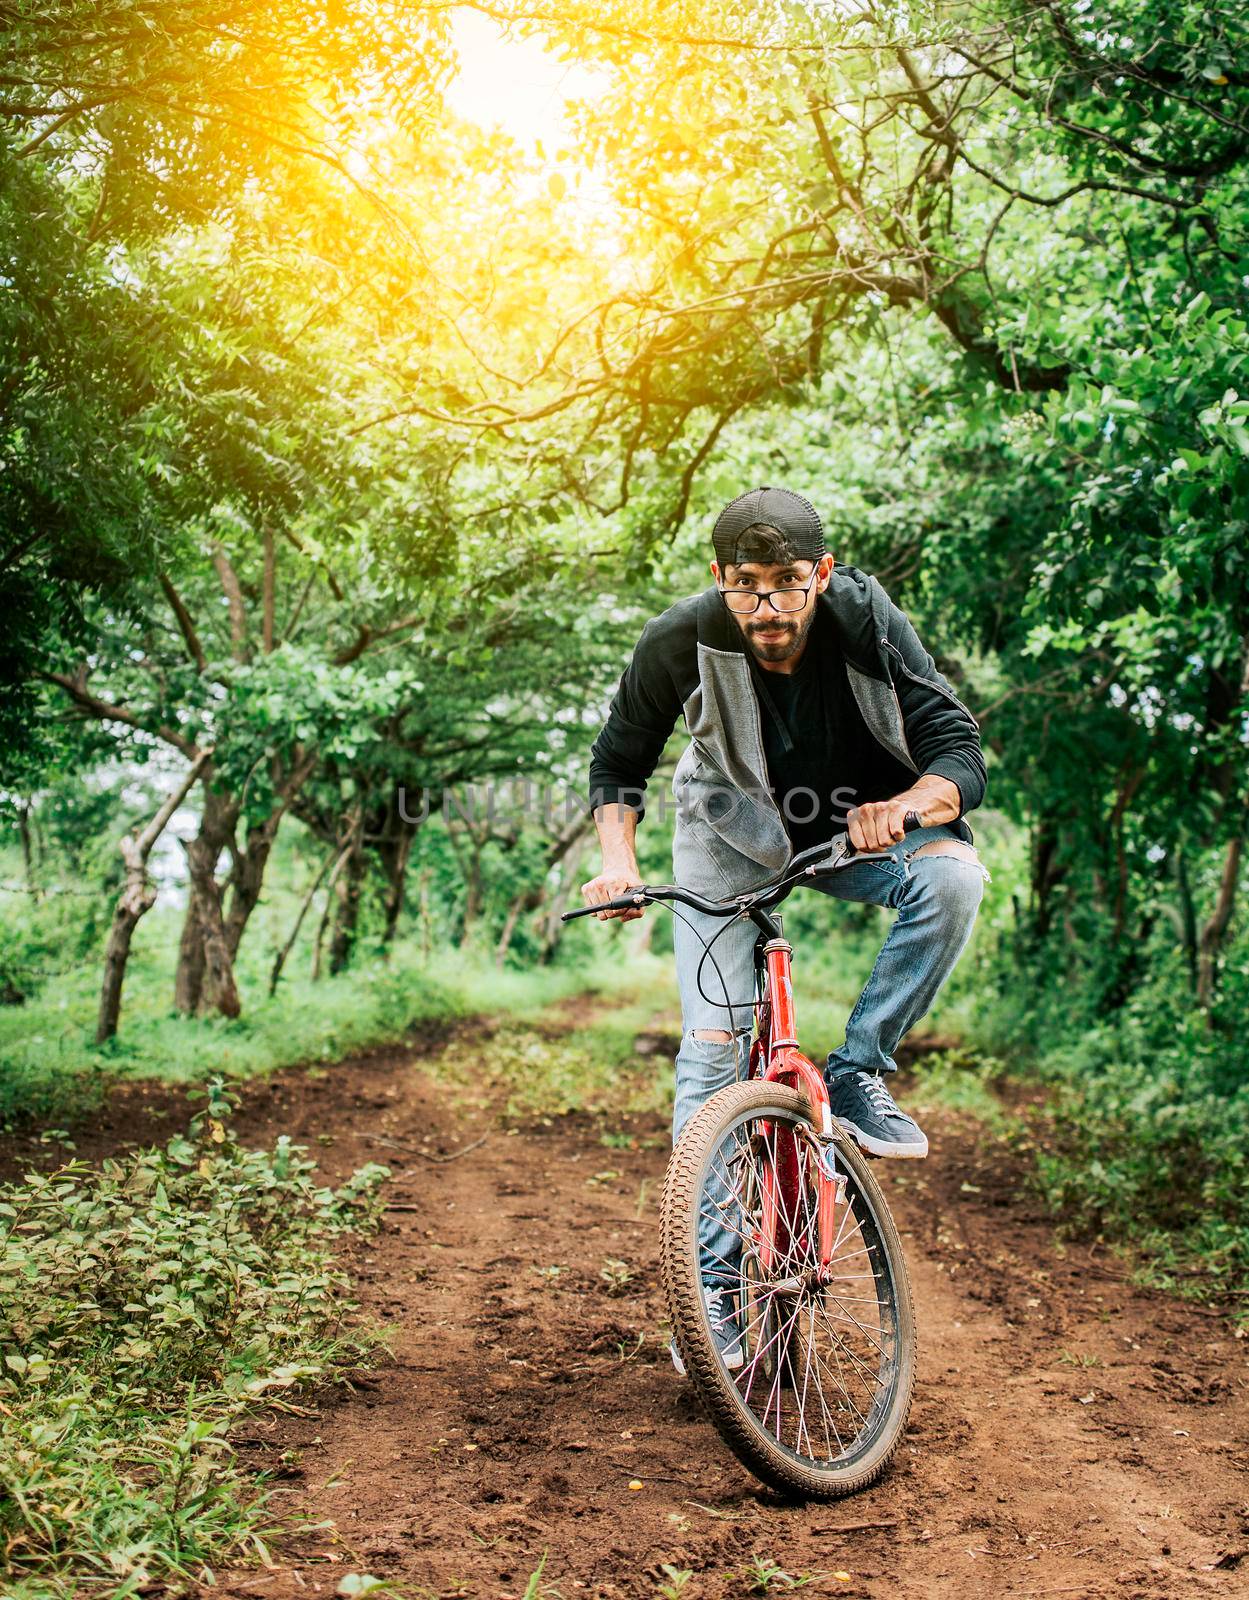 A guy riding a bike in the countryside, Person riding a bike in the countryside, Portrait of a guy in cap riding a bike on a country road, Bicyclist person on his bike on a country road forest.